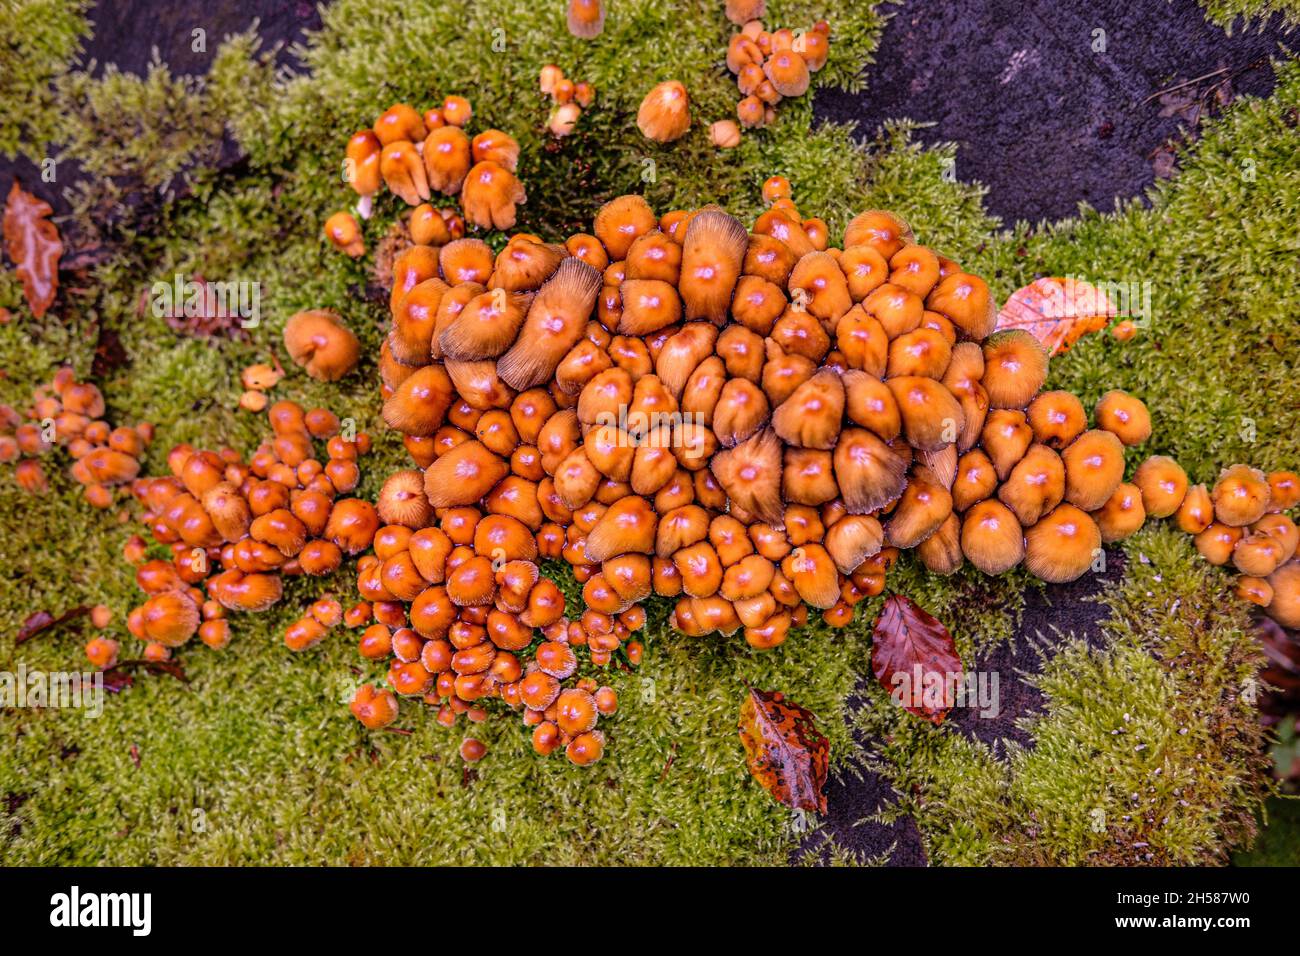 Top view of a group of small brown old mushrooms Stock Photo